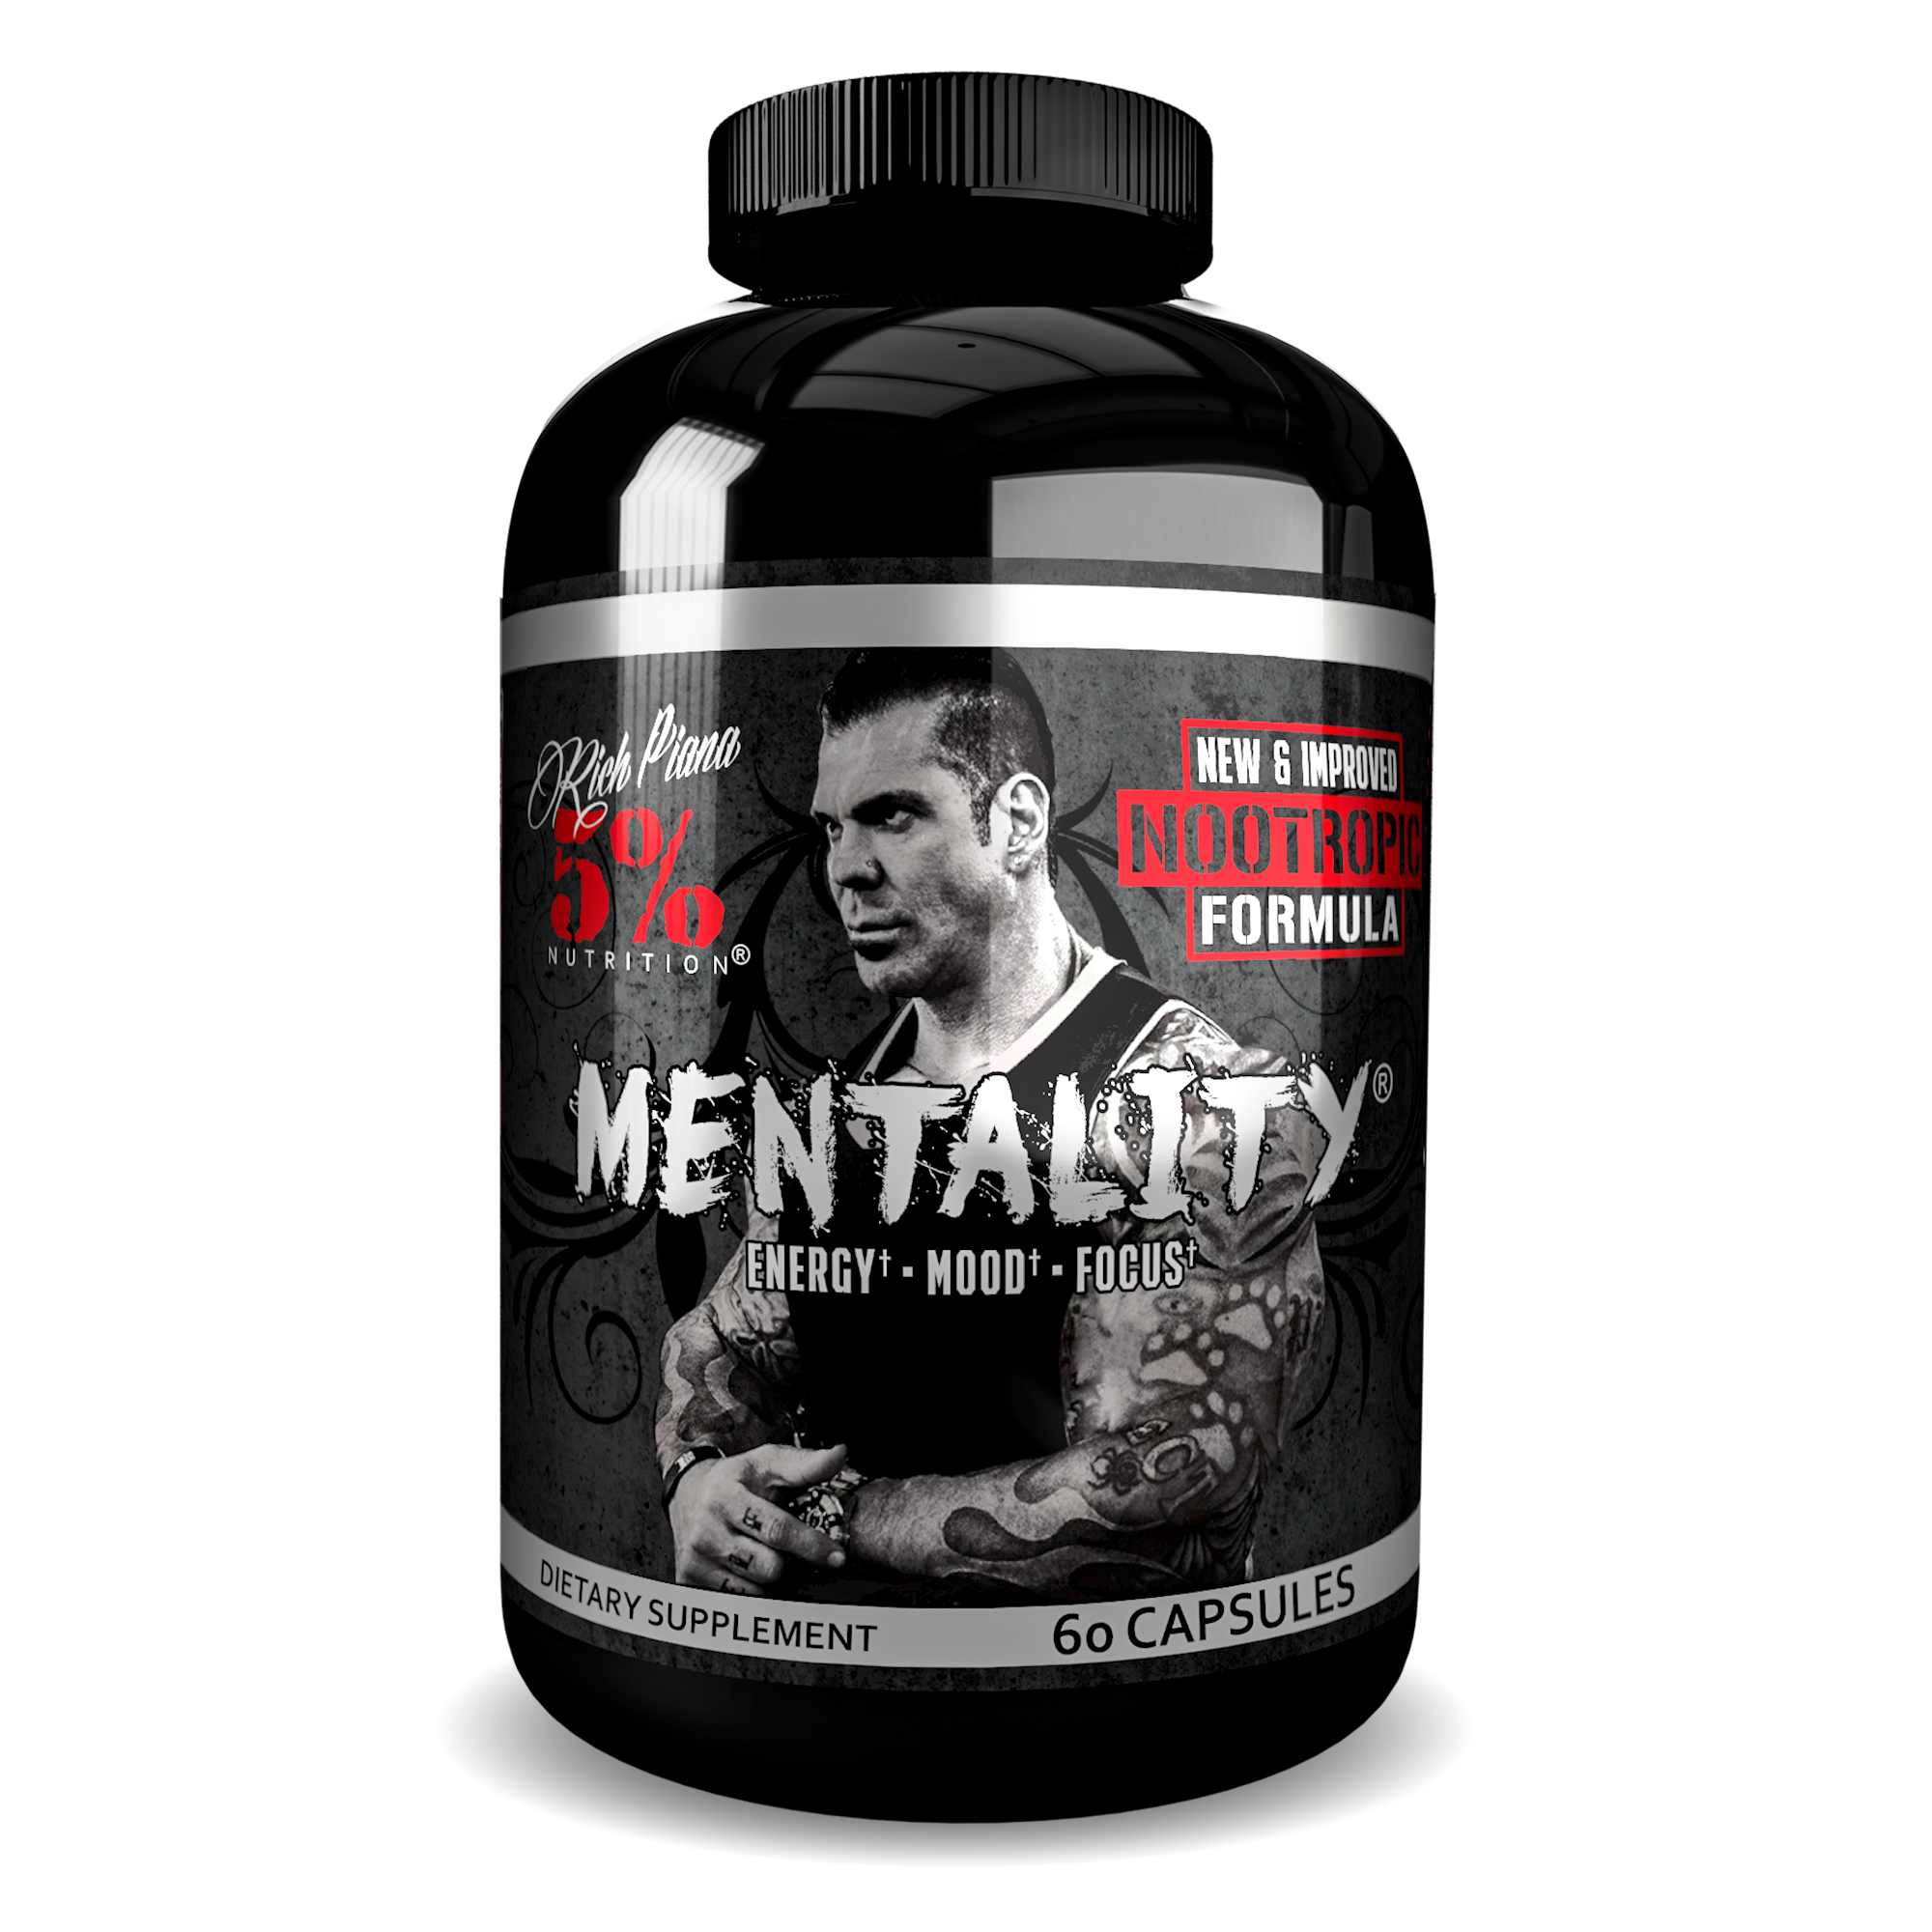 5% Nutrition - Mentality Nootropic